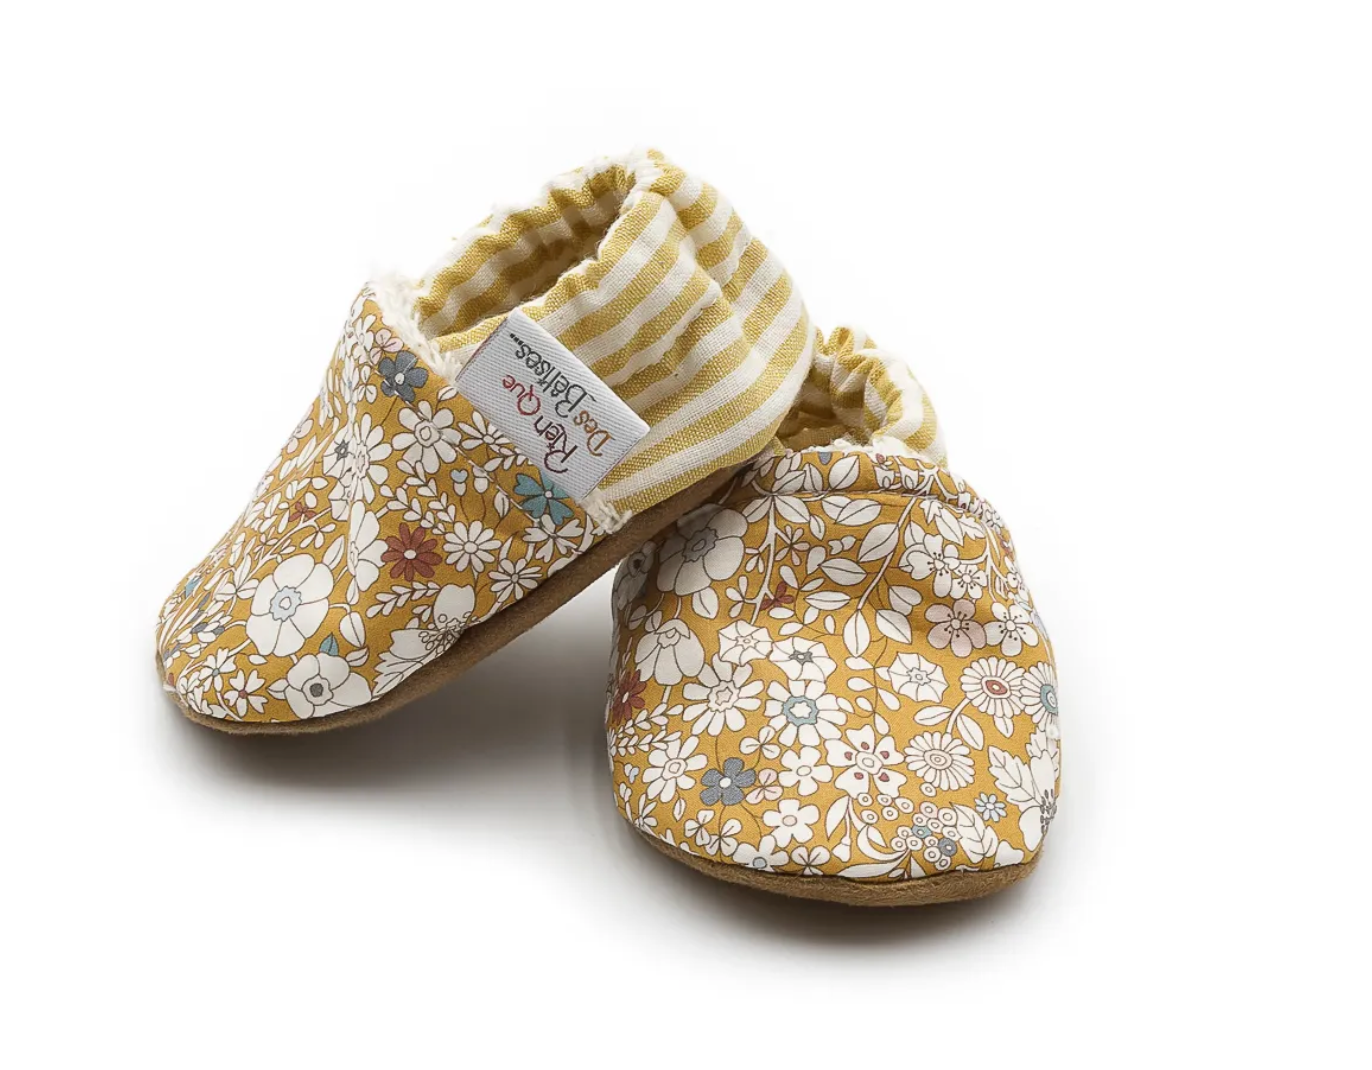 Chaussons Liberty June's - divers tailles